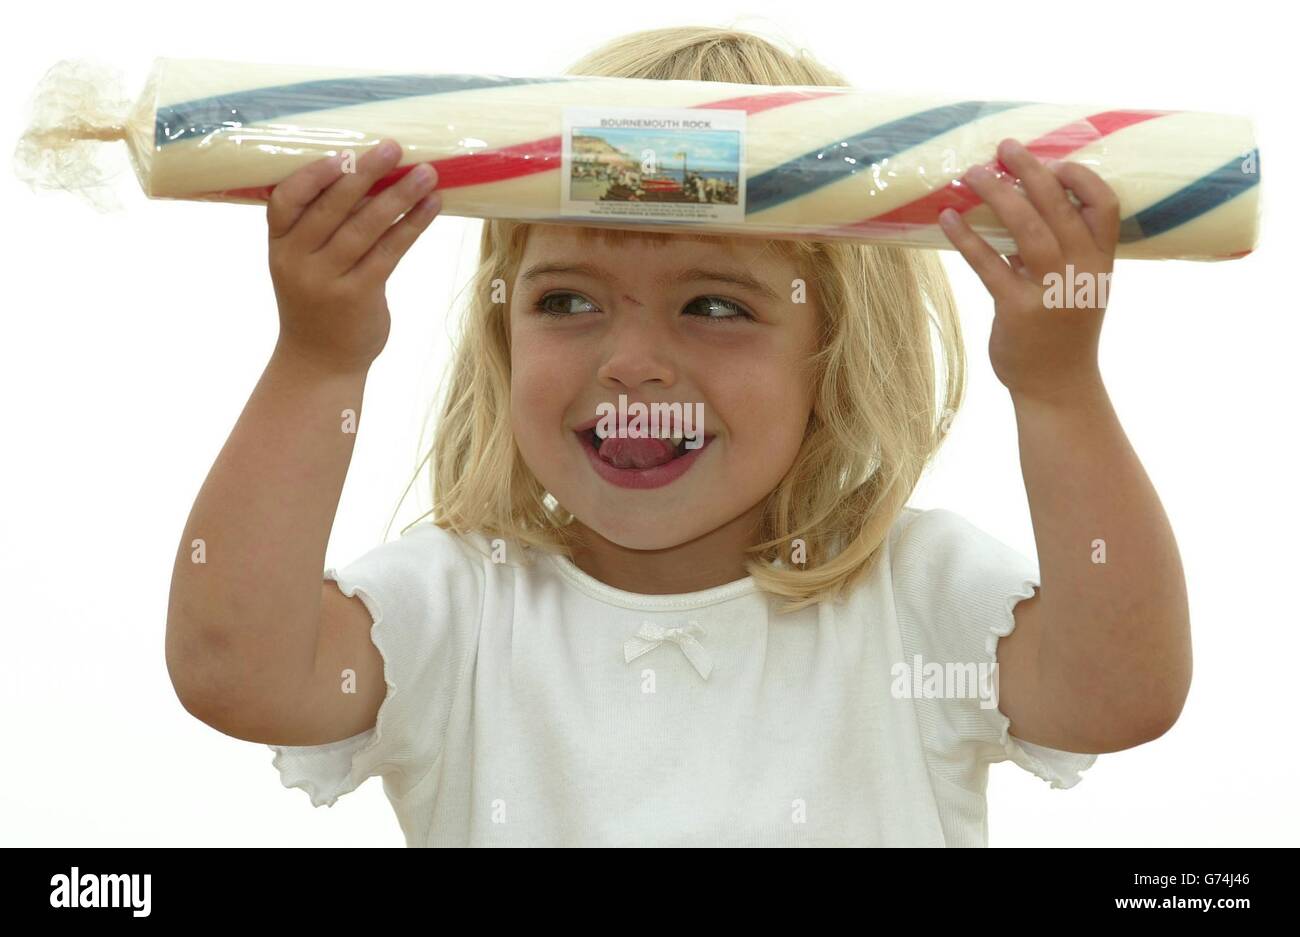 Two-year-old Jasmine Shaw licks her lips as she struggles under the weight of the 17 inch stick of rock that she is presenting to Queen Elizabeth II at her grandfather's shop on Bournemouth Pier in Dorset. The youngster will handover the seaside sweet when the Queen visits the resort. Stock Photo